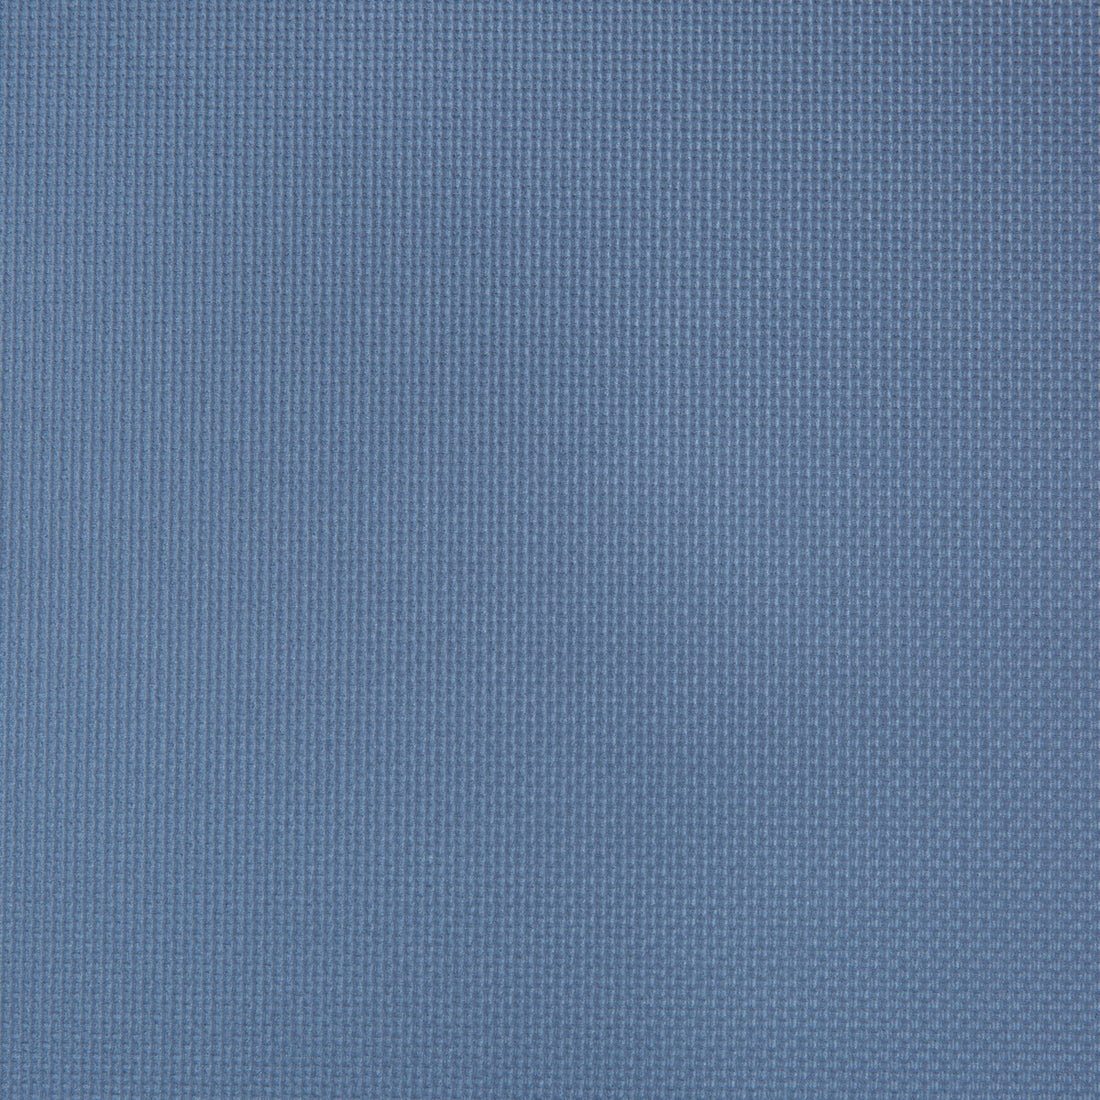 Sidney fabric in blueberry color - pattern SIDNEY.50.0 - by Kravet Contract